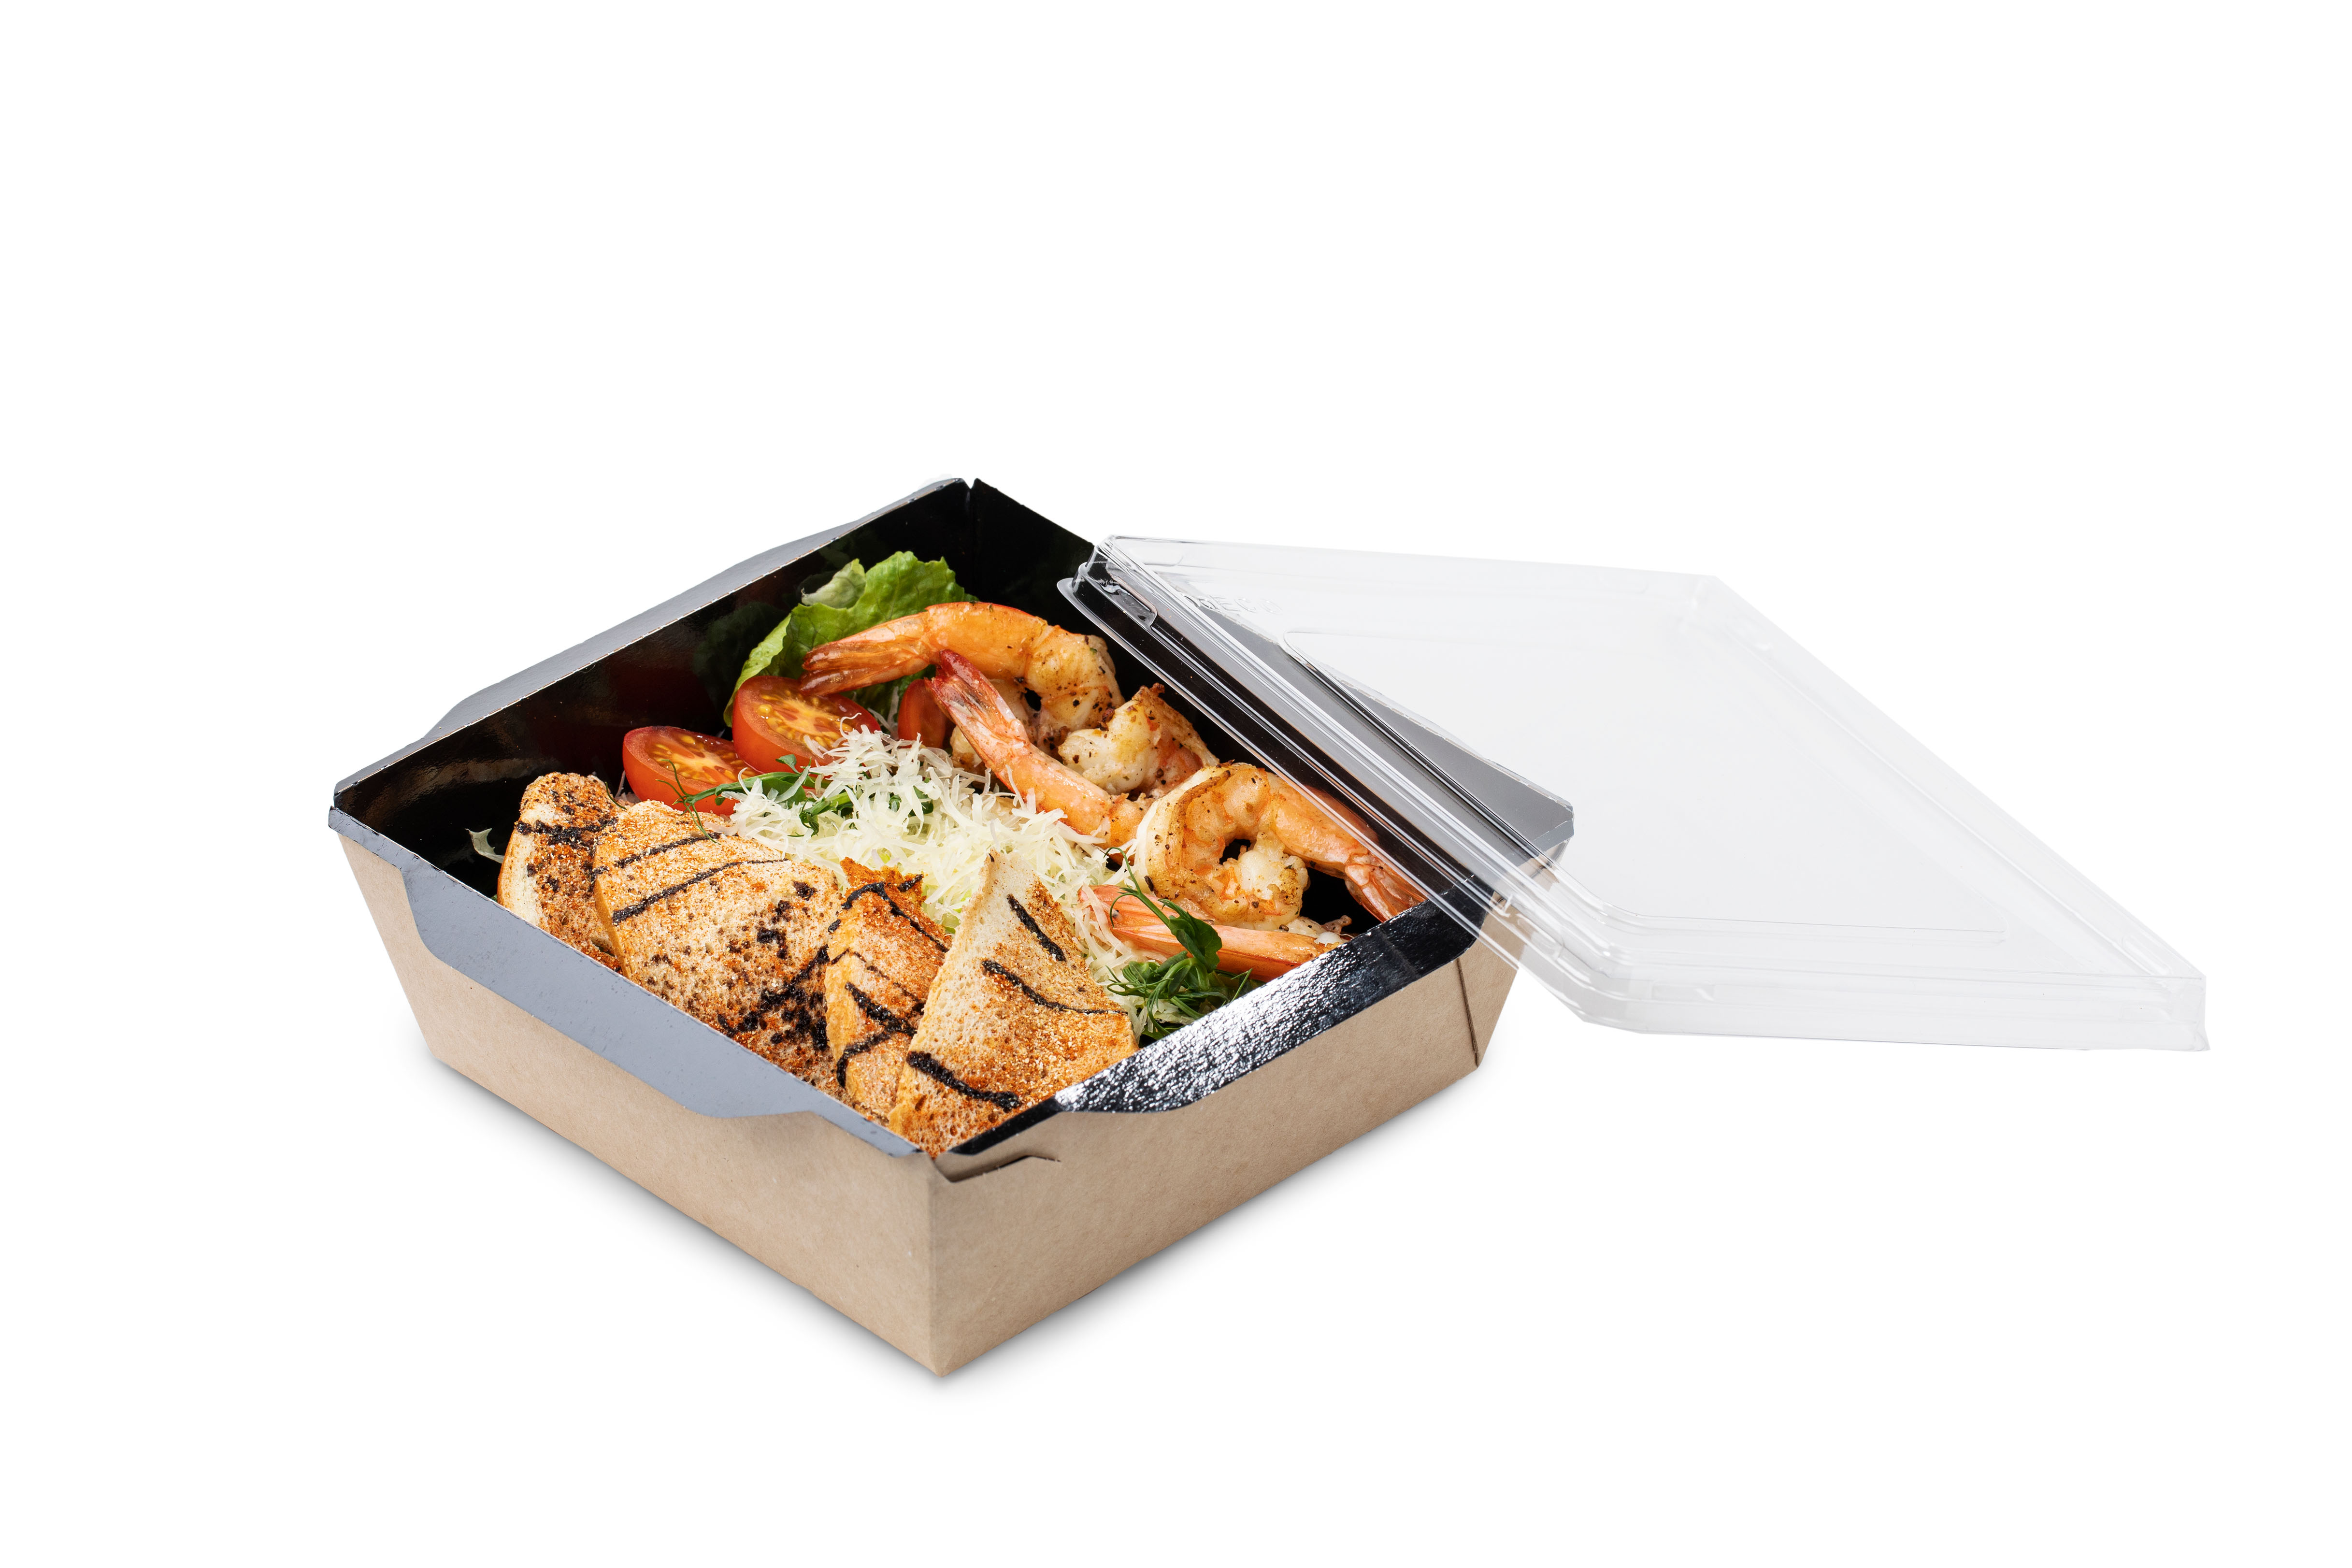 Salad bowls OSQ OPSALAD 500 BE with transparent lid Black Edition